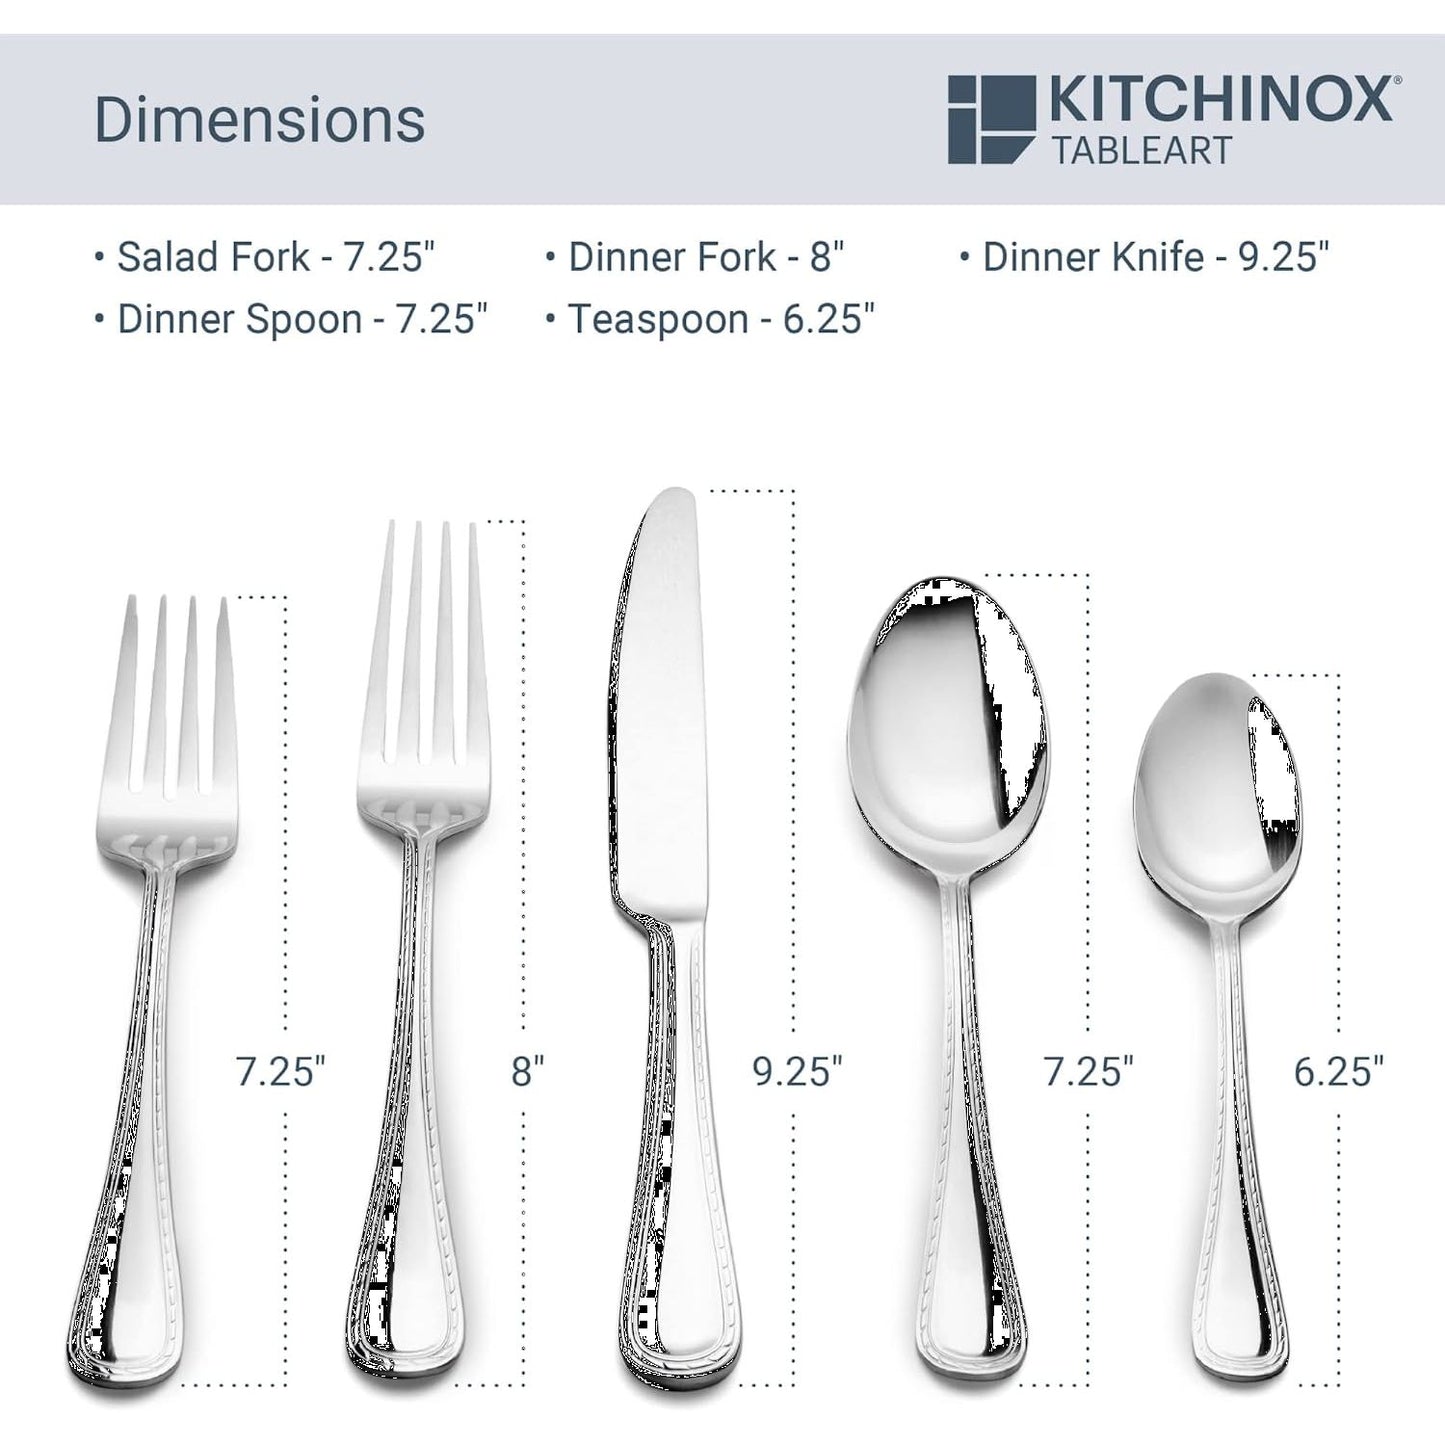 Kitchinox Seaport 43-Piece Service For 8.